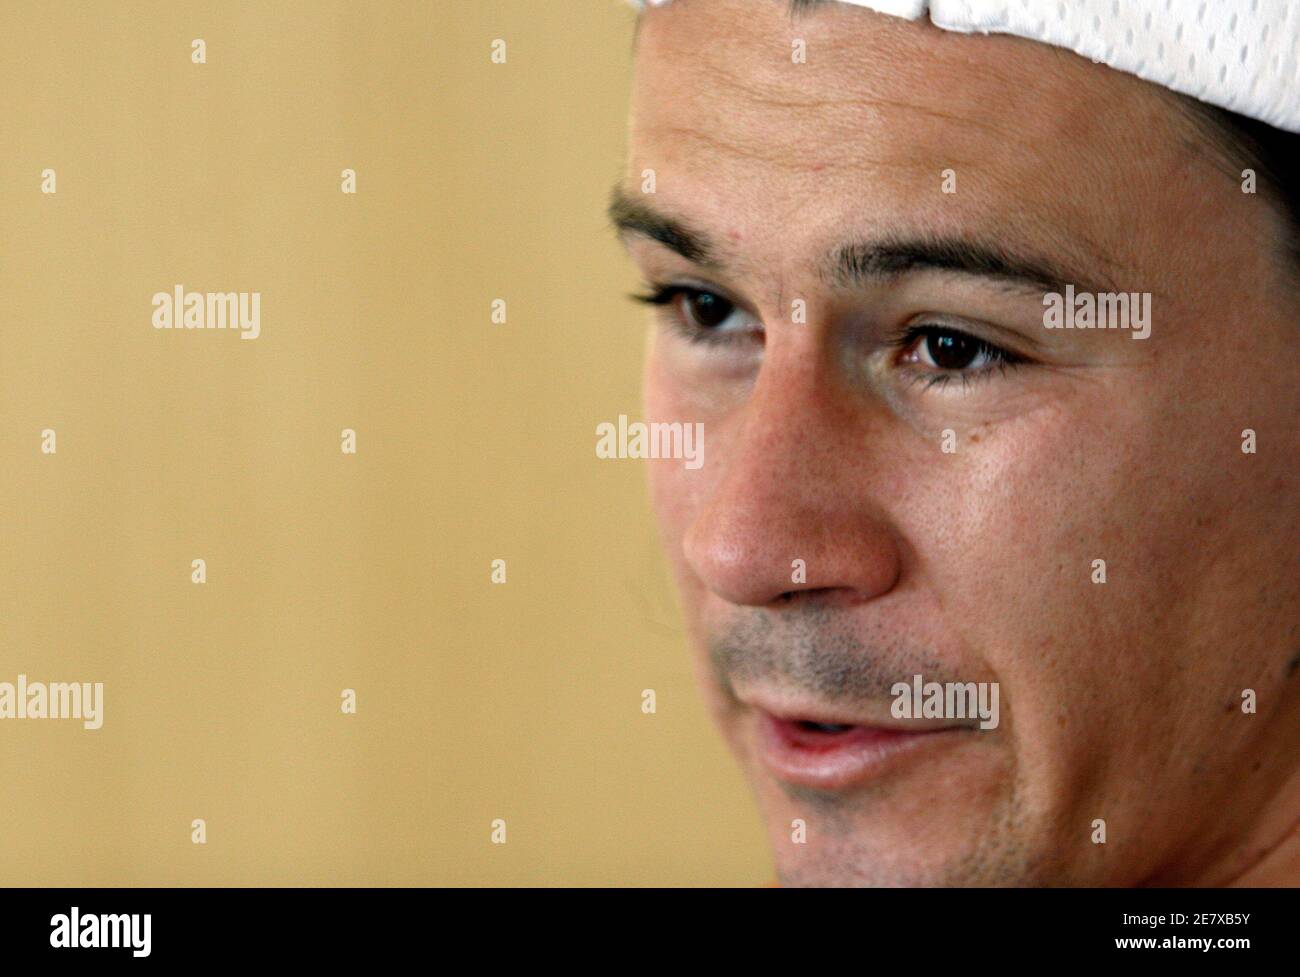 Guillermo Coria of Argentina speaks at a news conference after he retired early from a match against his compatriot Juan Pablo Brzezicki during the Copa Petrobras tennis tournament at the Pampulha Yacht Club in Belo Horizonte, central Brazil, October 23, 2007. Coria, former world number three, returned to competition after 13 months of inactivity due to shoulder problems, but retired from the match after losing the first set 3-6 and complaining of pain. REUTERS/Washington Alves (BRAZIL) Stock Photo